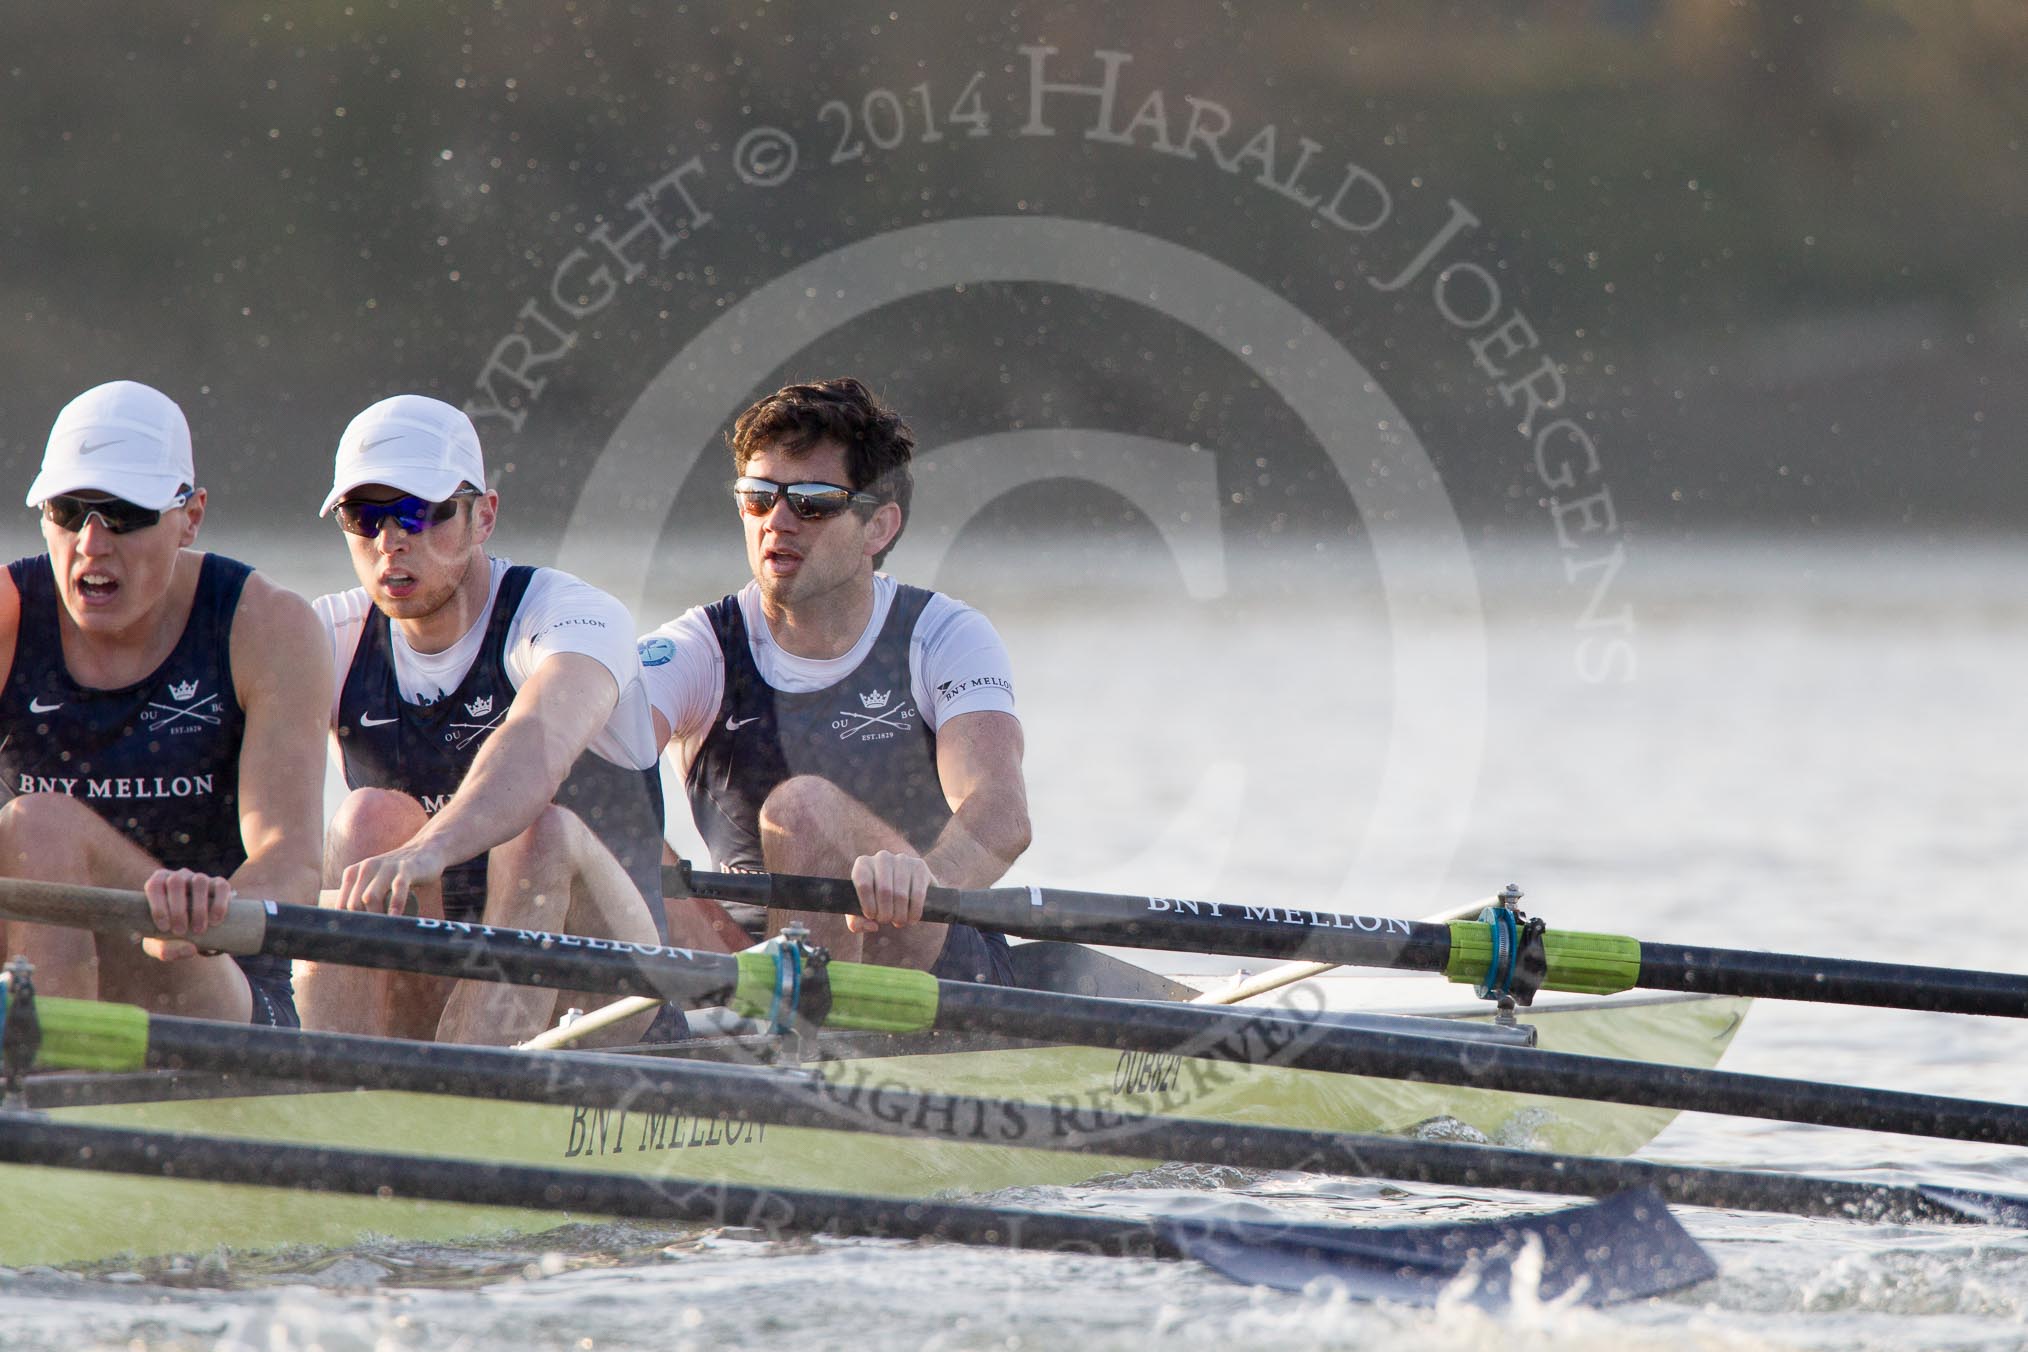 The Boat Race season 2014 - fixture OUBC vs German U23: The OUBC boat: 3 Karl Hudspith, 2 Chris Fairweather, bow Storm Uru..
River Thames between Putney Bridge and Chiswick Bridge,



on 08 March 2014 at 16:48, image #75